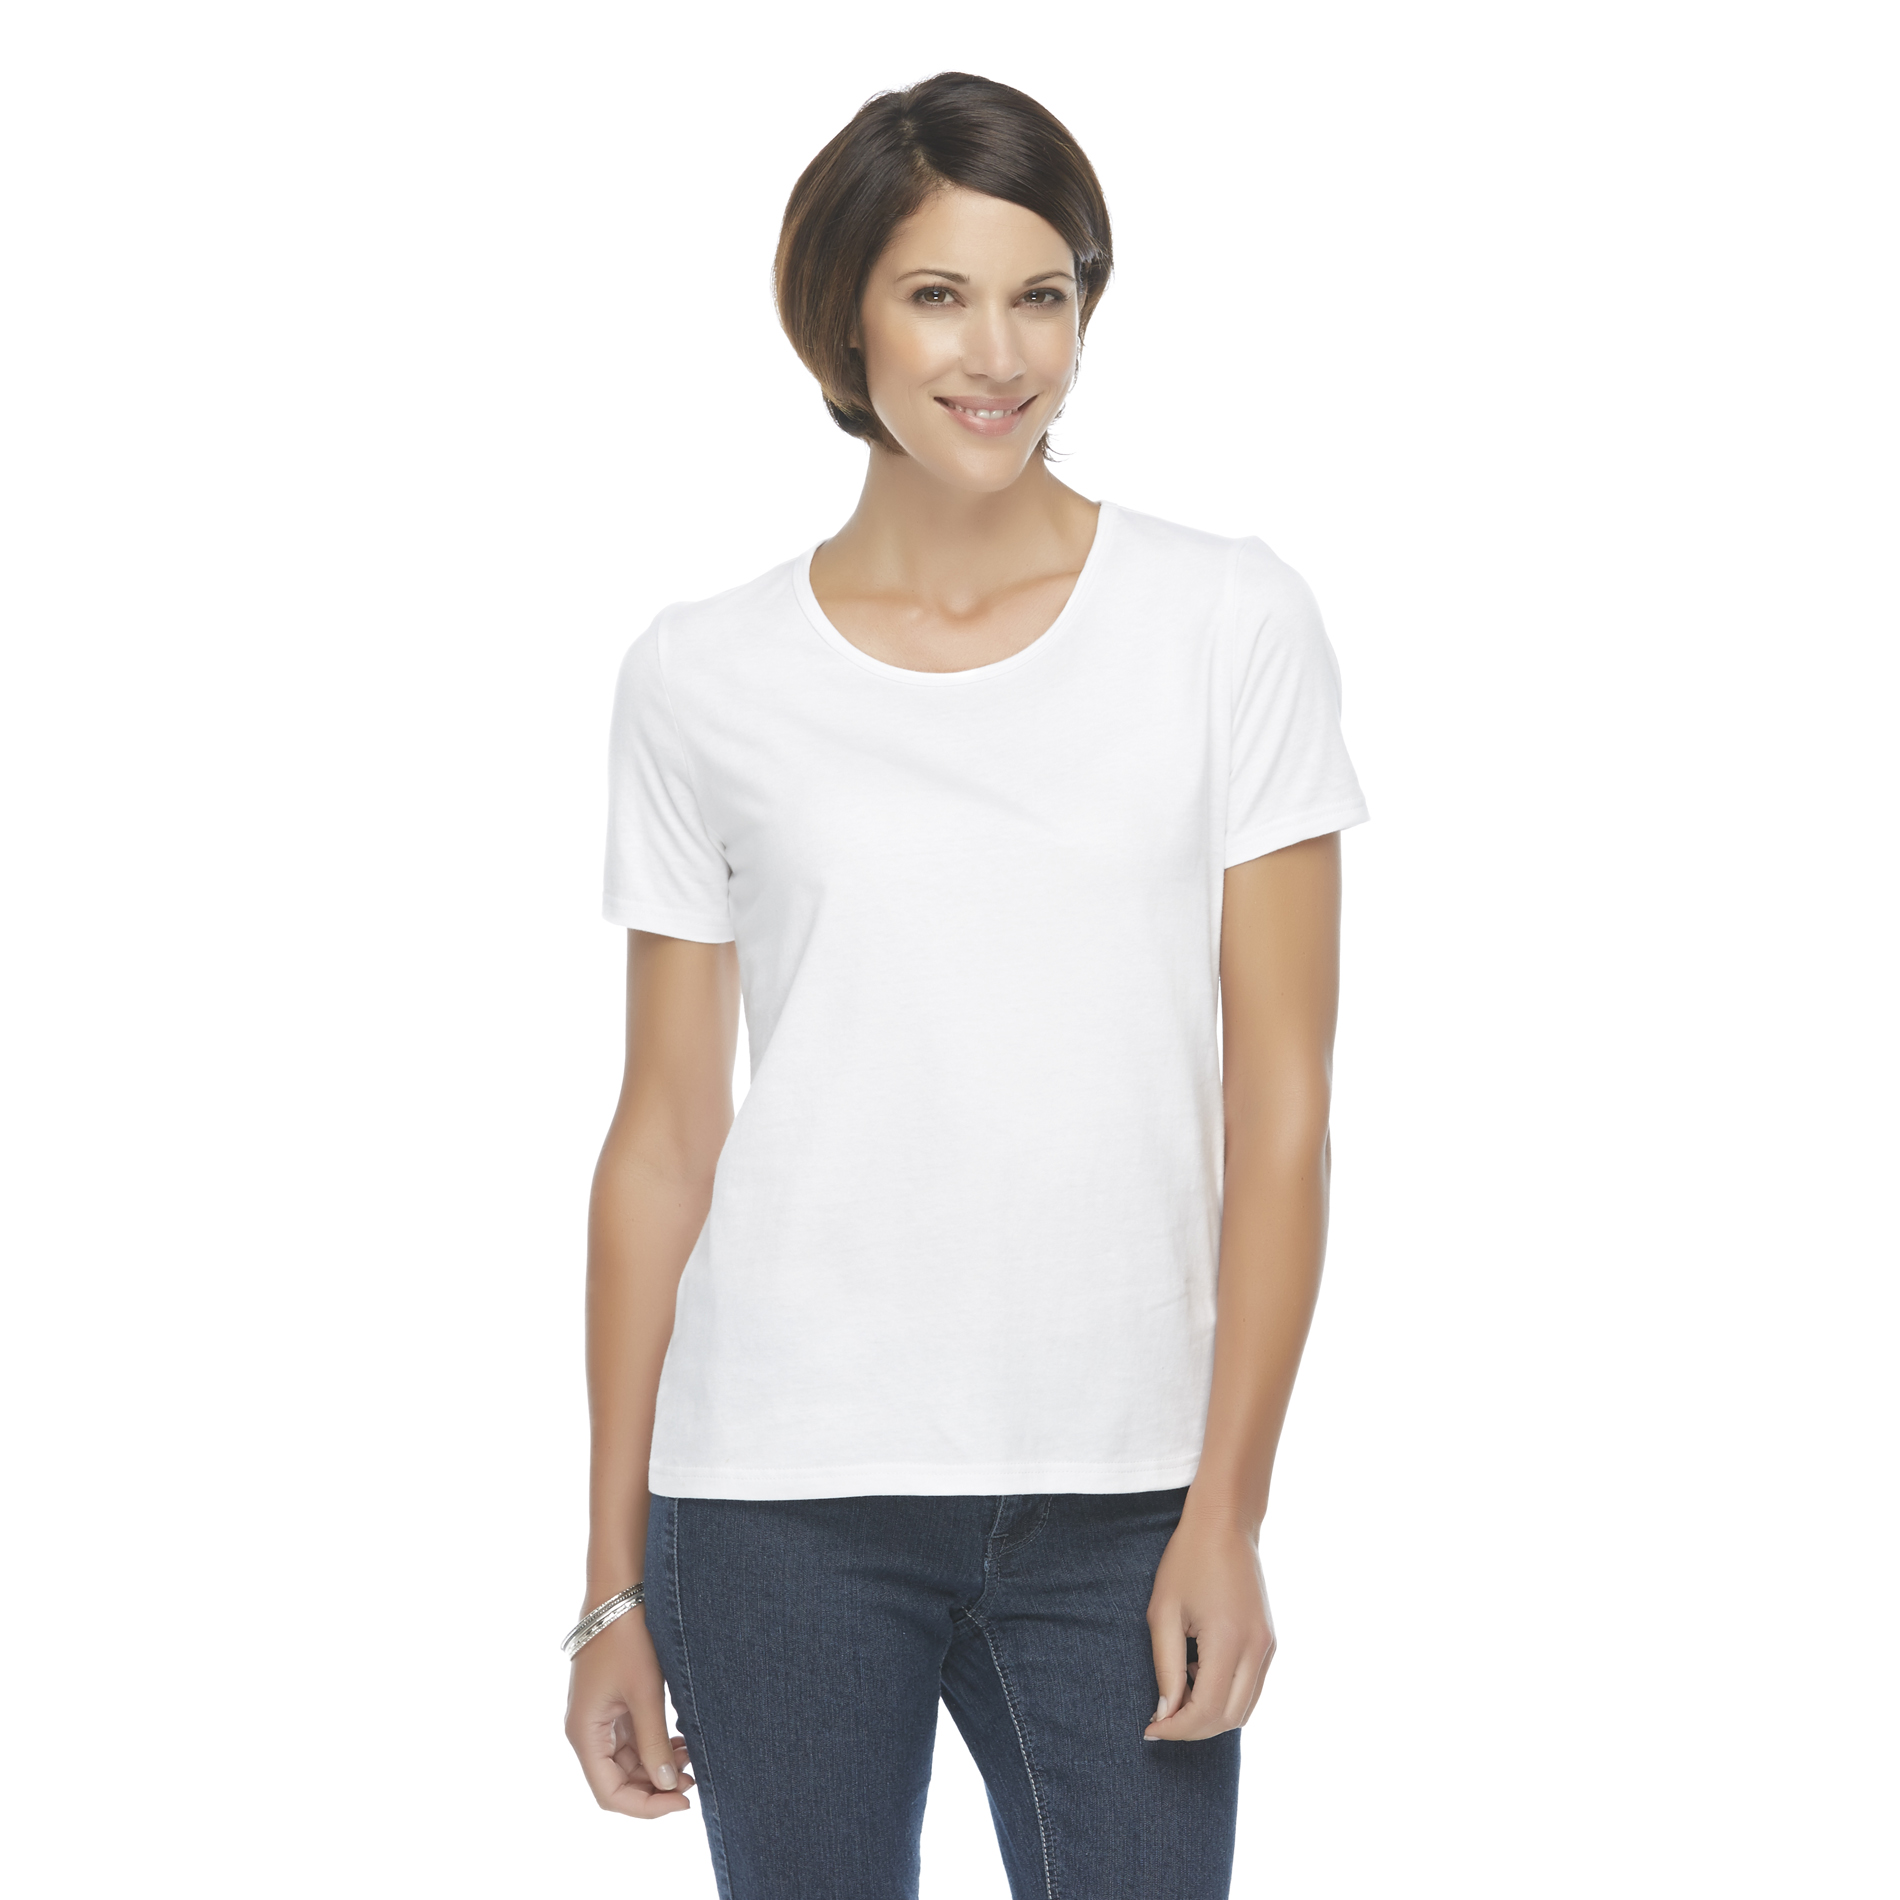 UPC 650613663248 - Basic Editions Women's Scoop Neck T Shirt - FIVE Y ...